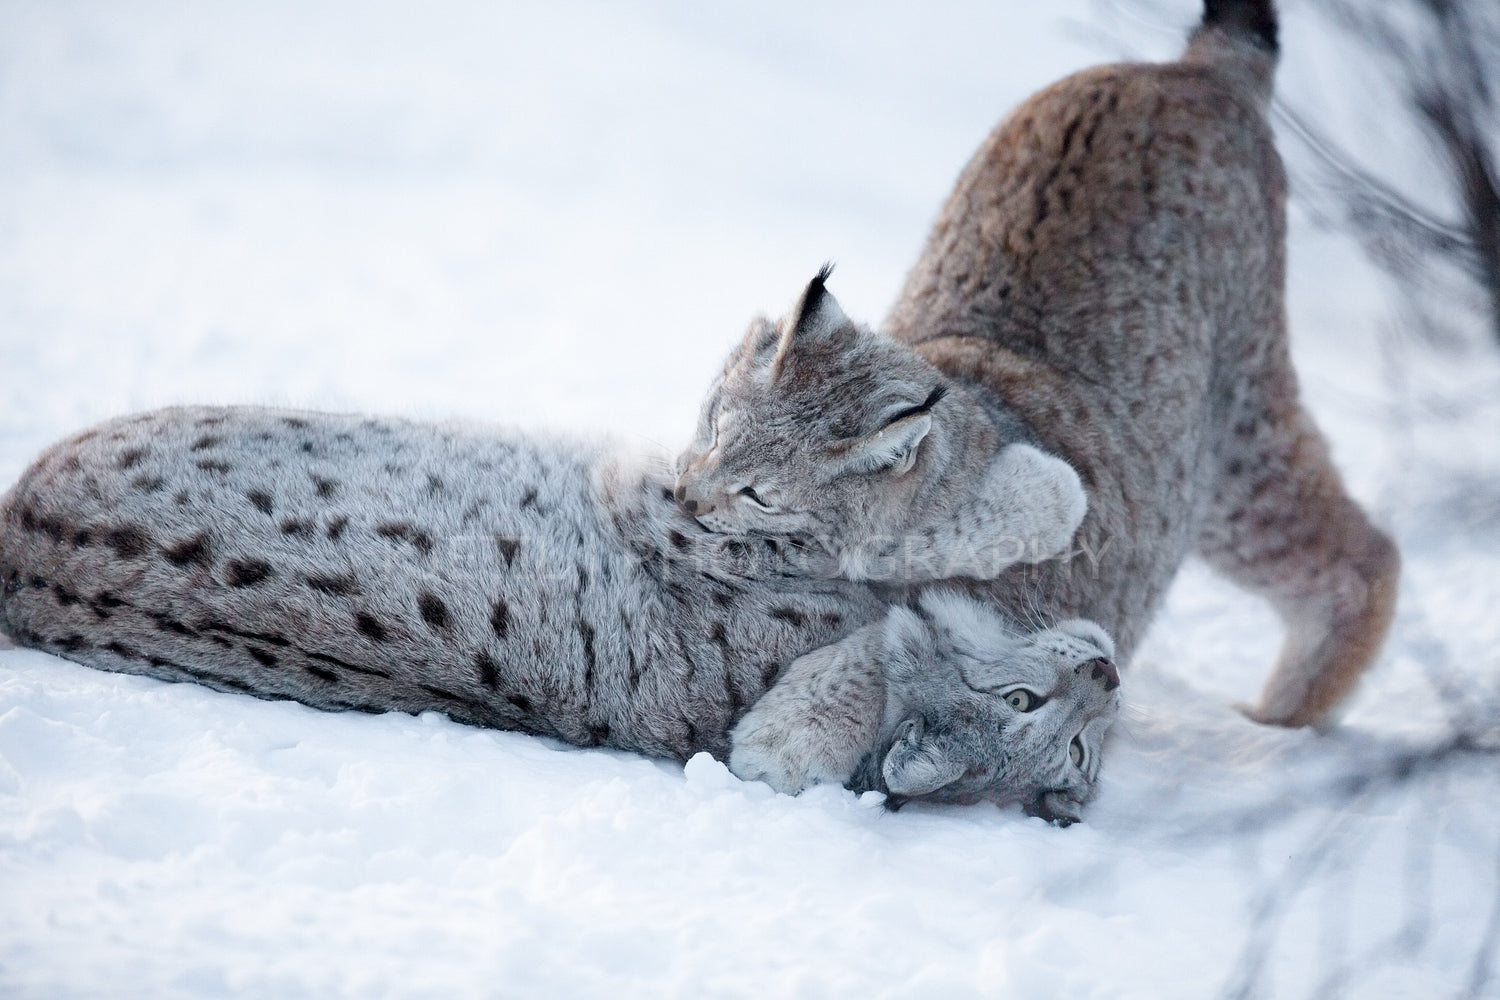 Two lynx playing in the snow